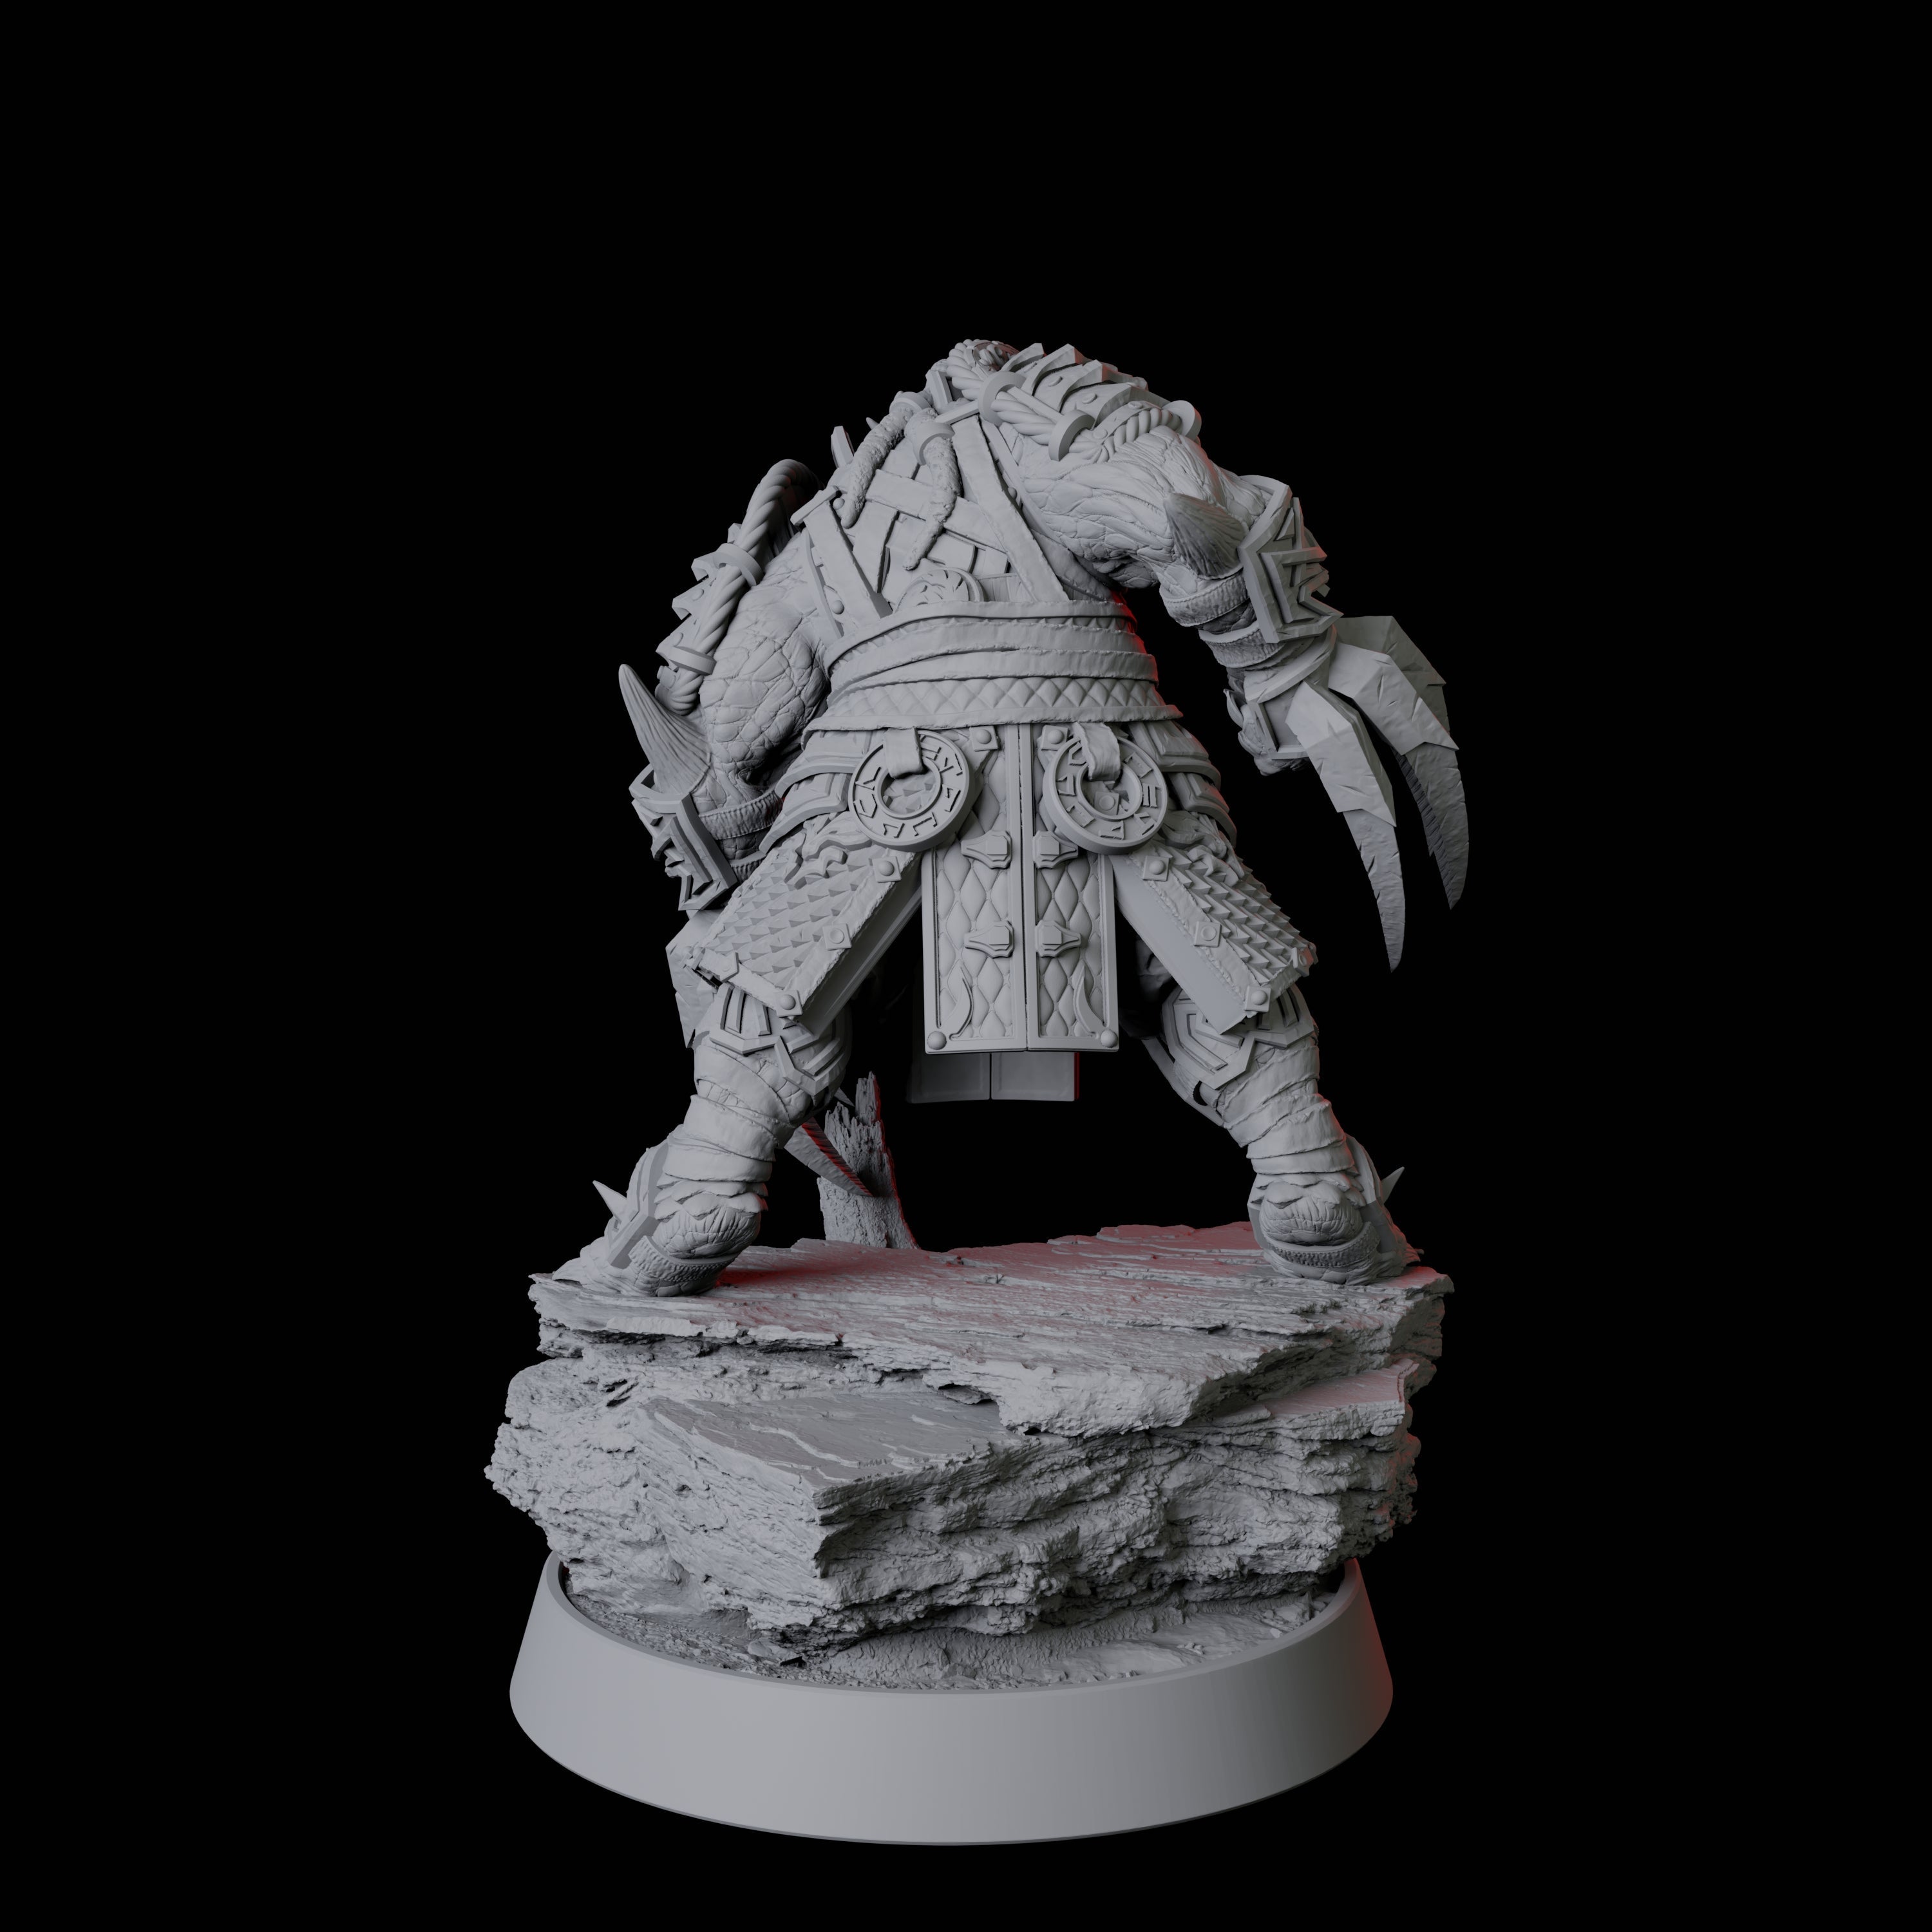 Wolverine Dragonborn Fighter Miniature for Dungeons and Dragons